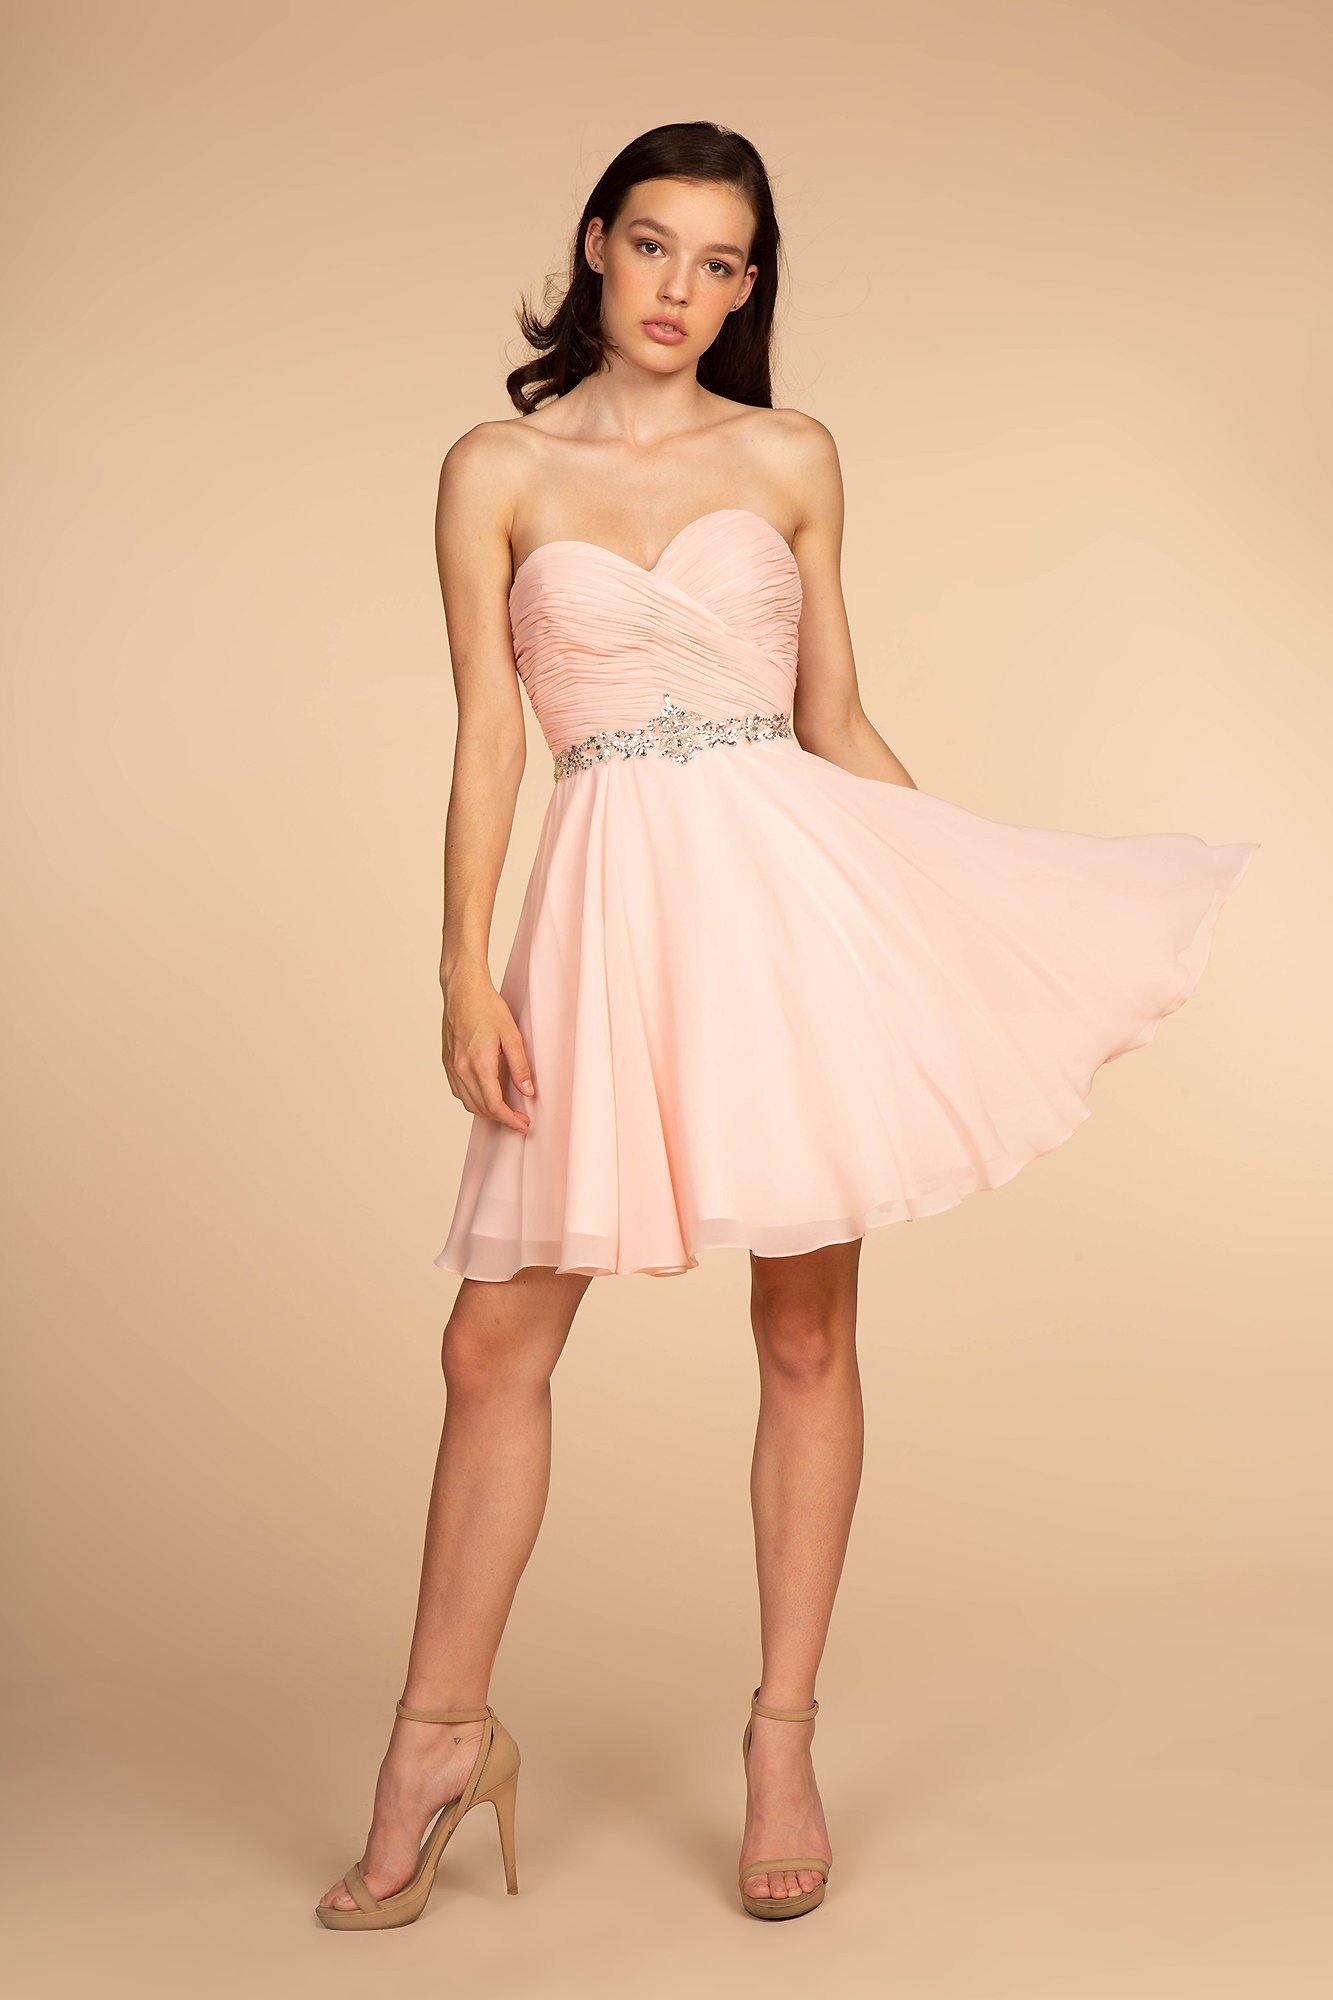 Ruched Strapless Sweetheart Chiffon Short Dress - The Dress Outlet Elizabeth K